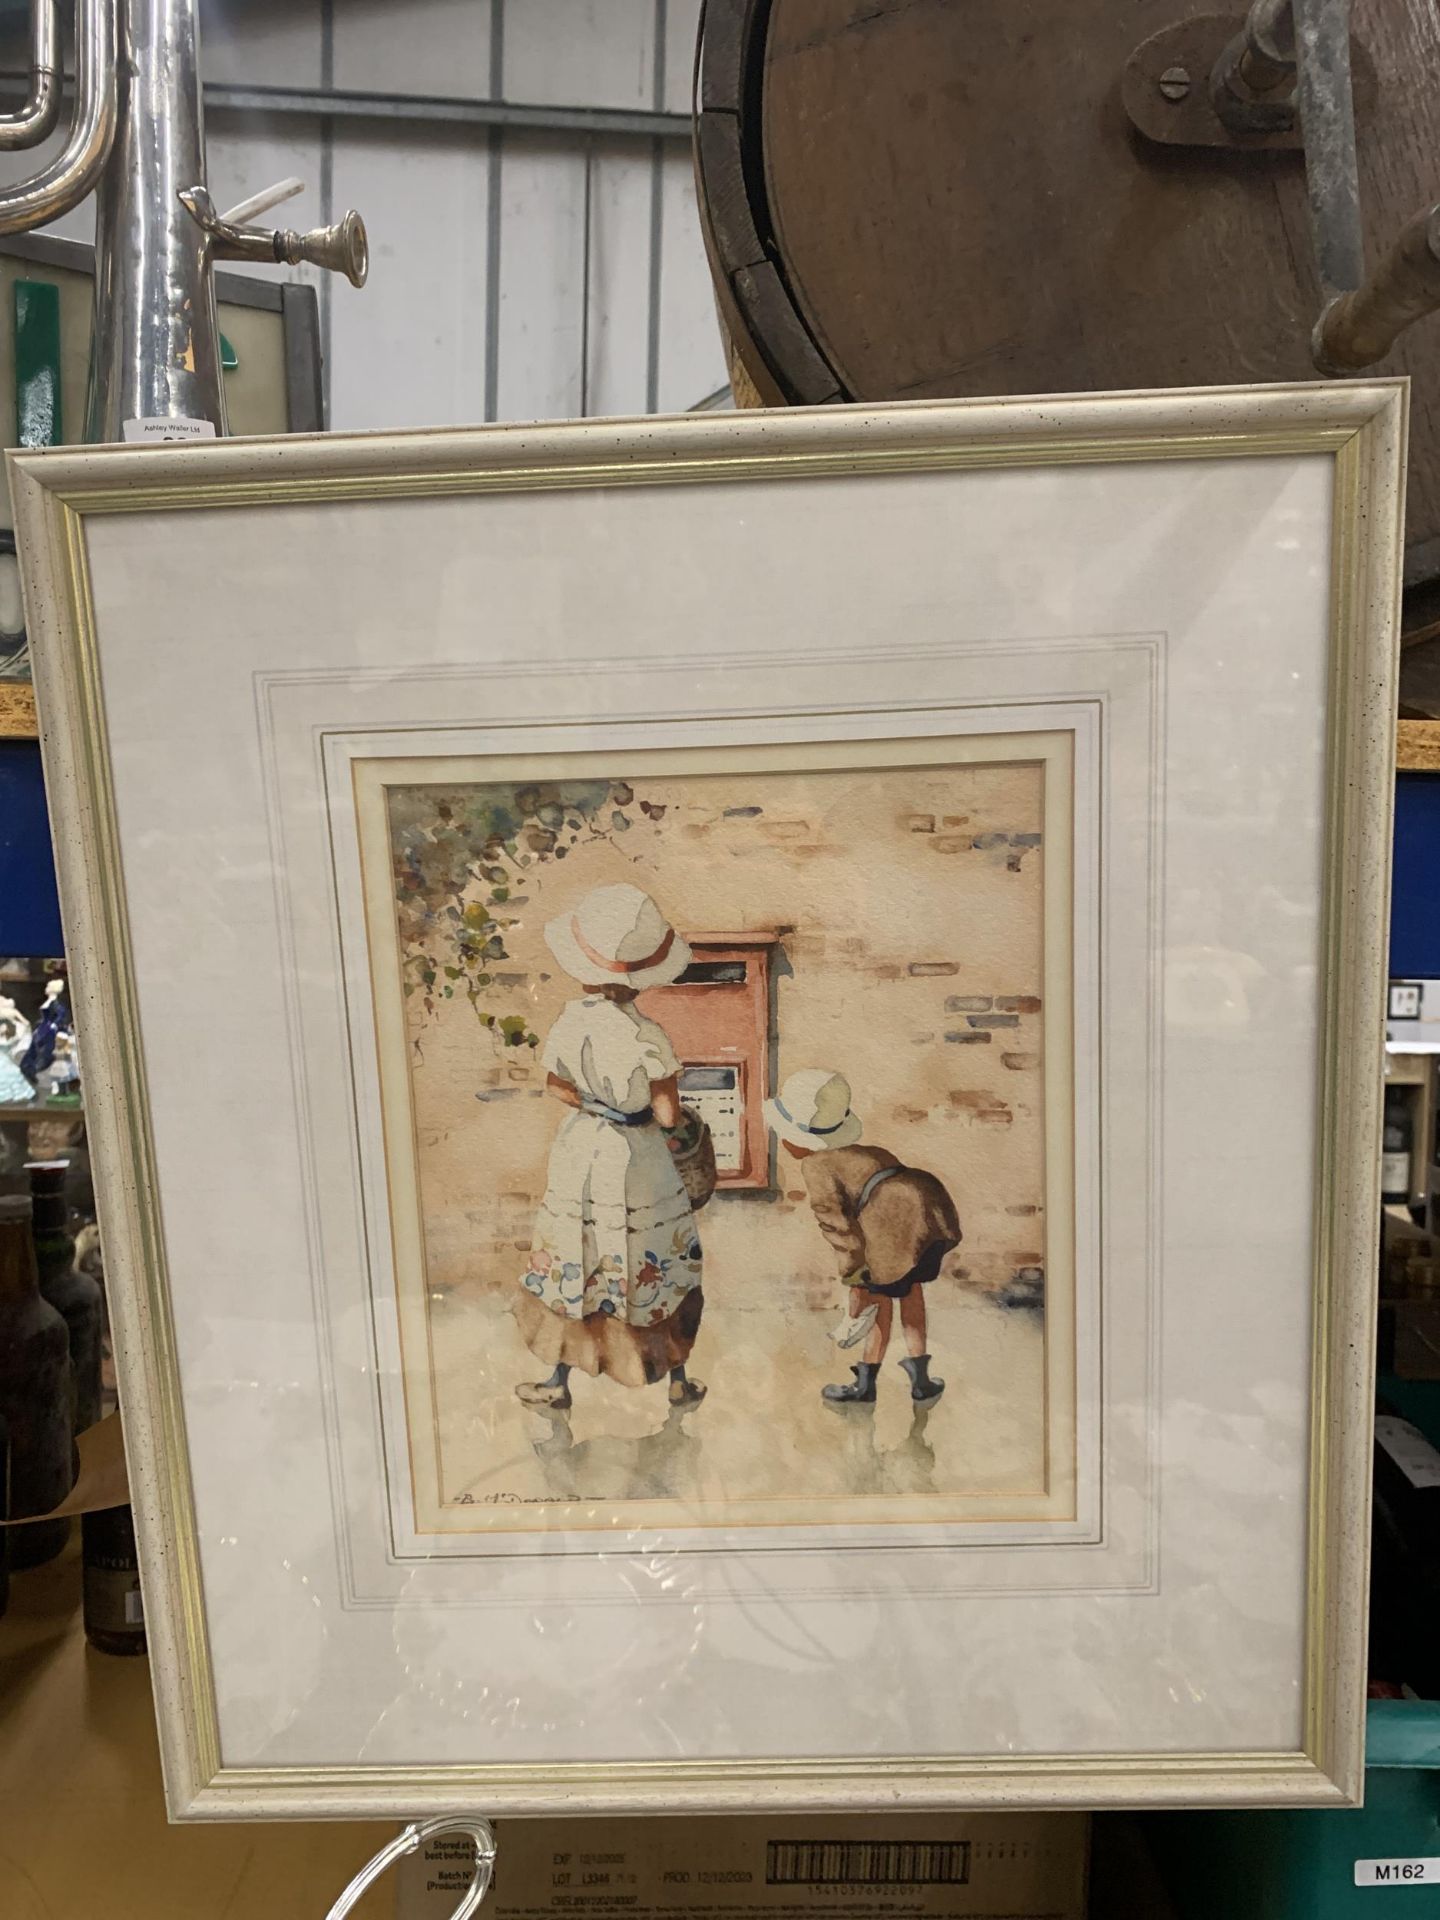 A BERNARD MCDONALD (BORN 1944) WATERCOLOUR OF CHILDREN AT A POST BOX SIGNED TO LOWER LEFT HAND